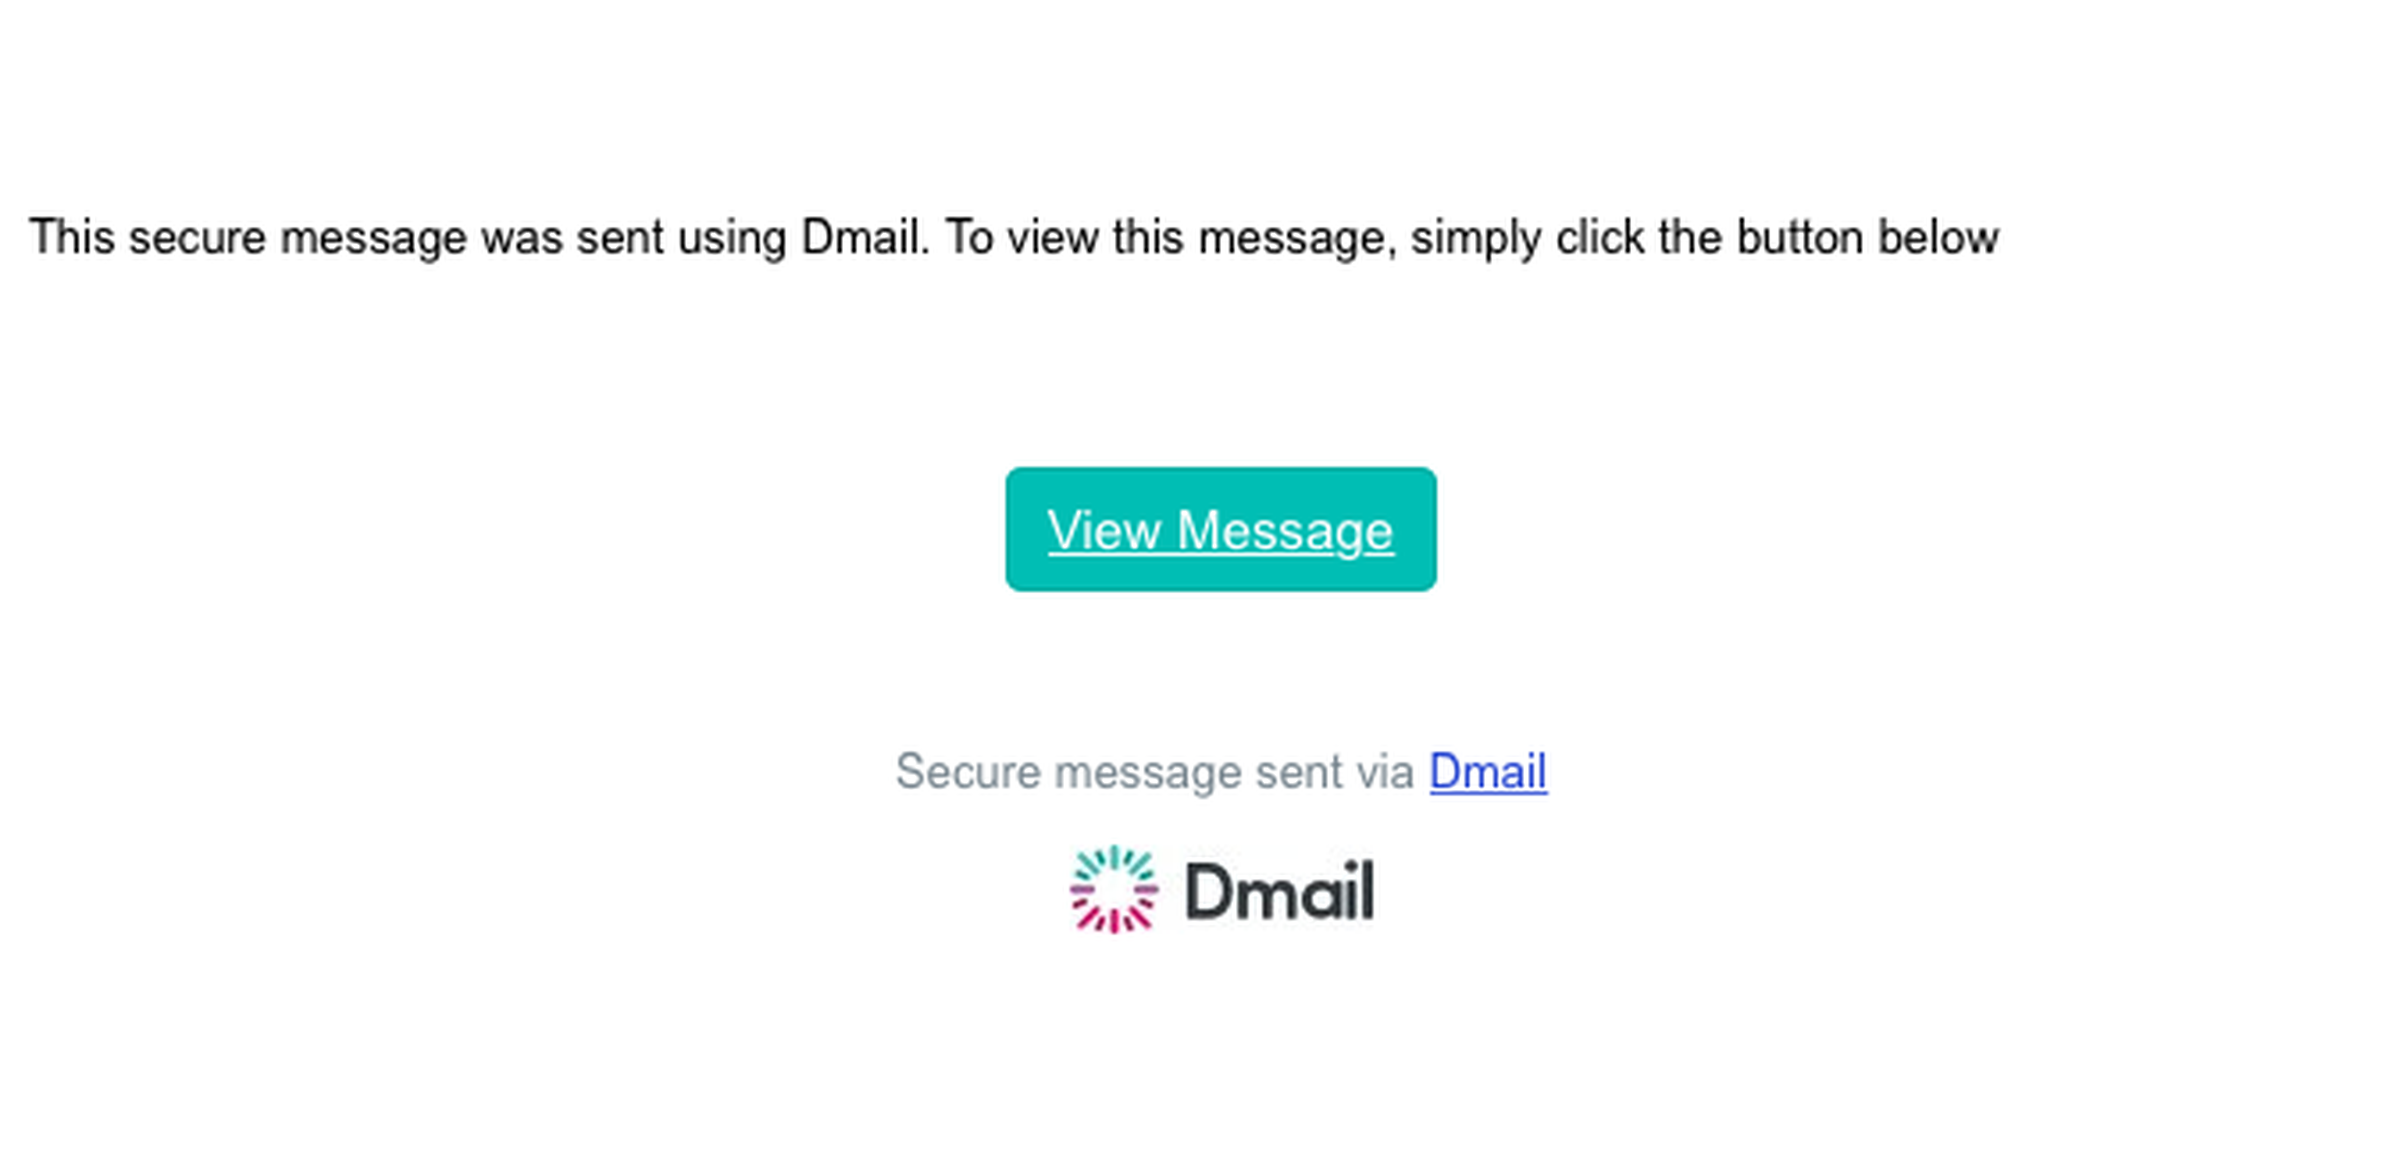 Self-destructing email with Dmail